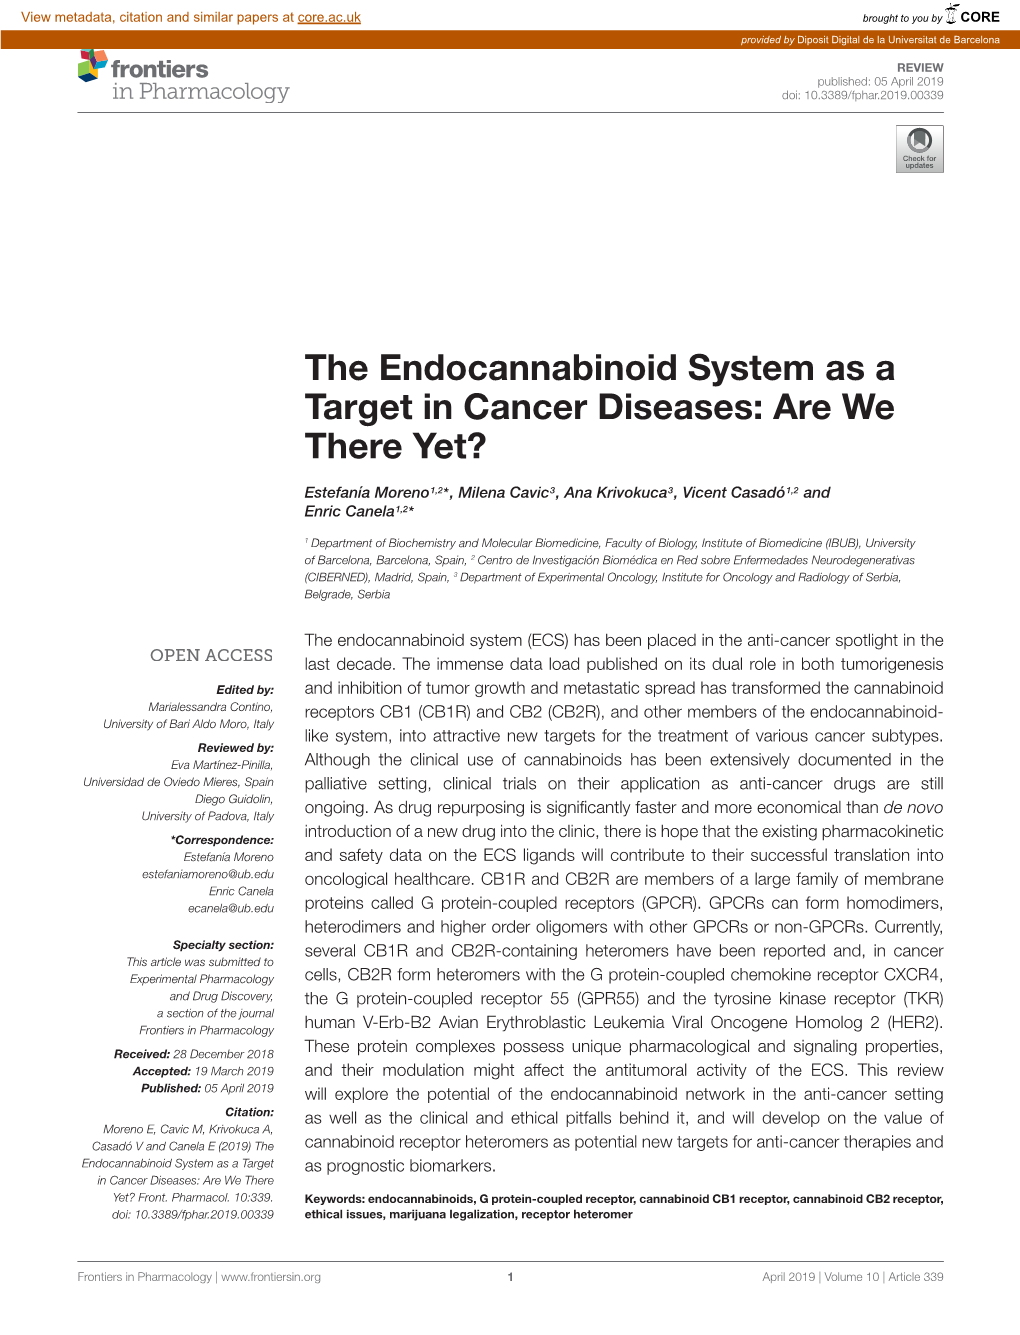 The Endocannabinoid System As a Target in Cancer Diseases: Are We There Yet?